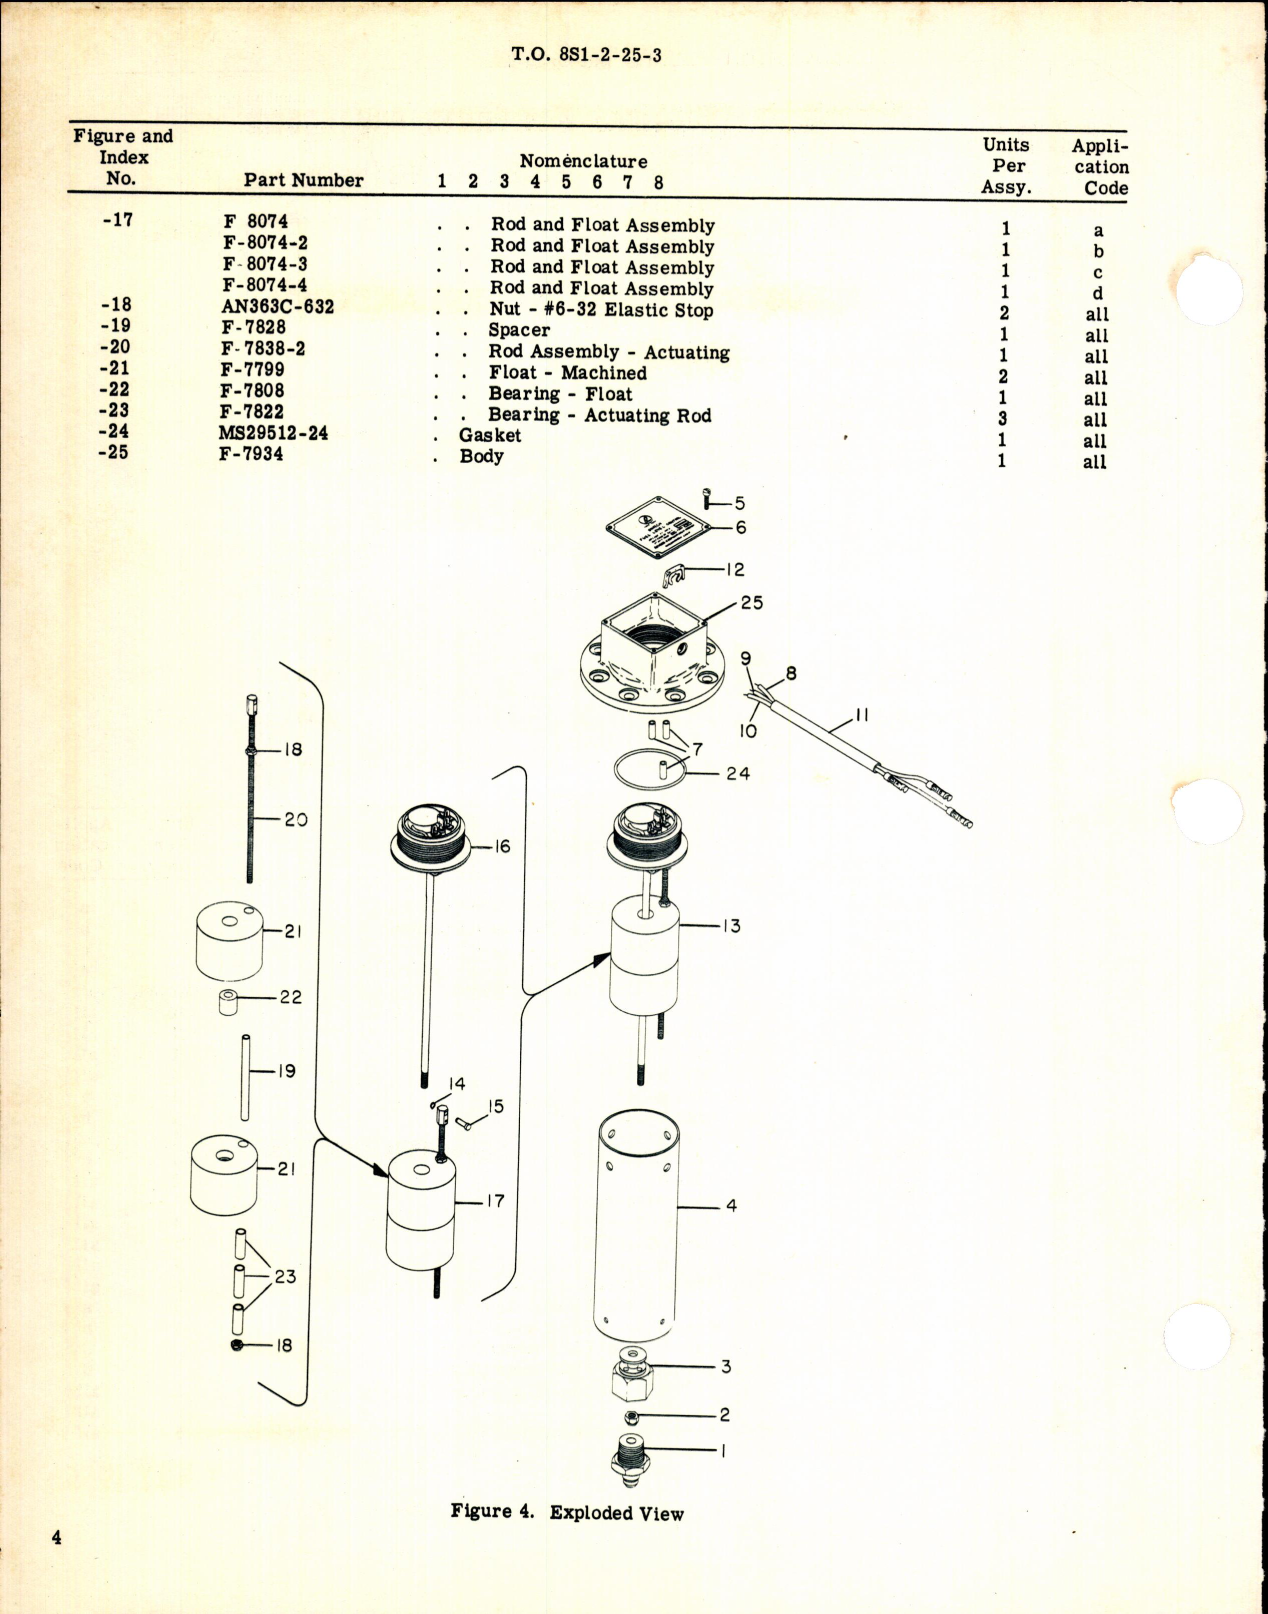 Sample page 4 from AirCorps Library document: Switch Assembly, Fuel Level Control